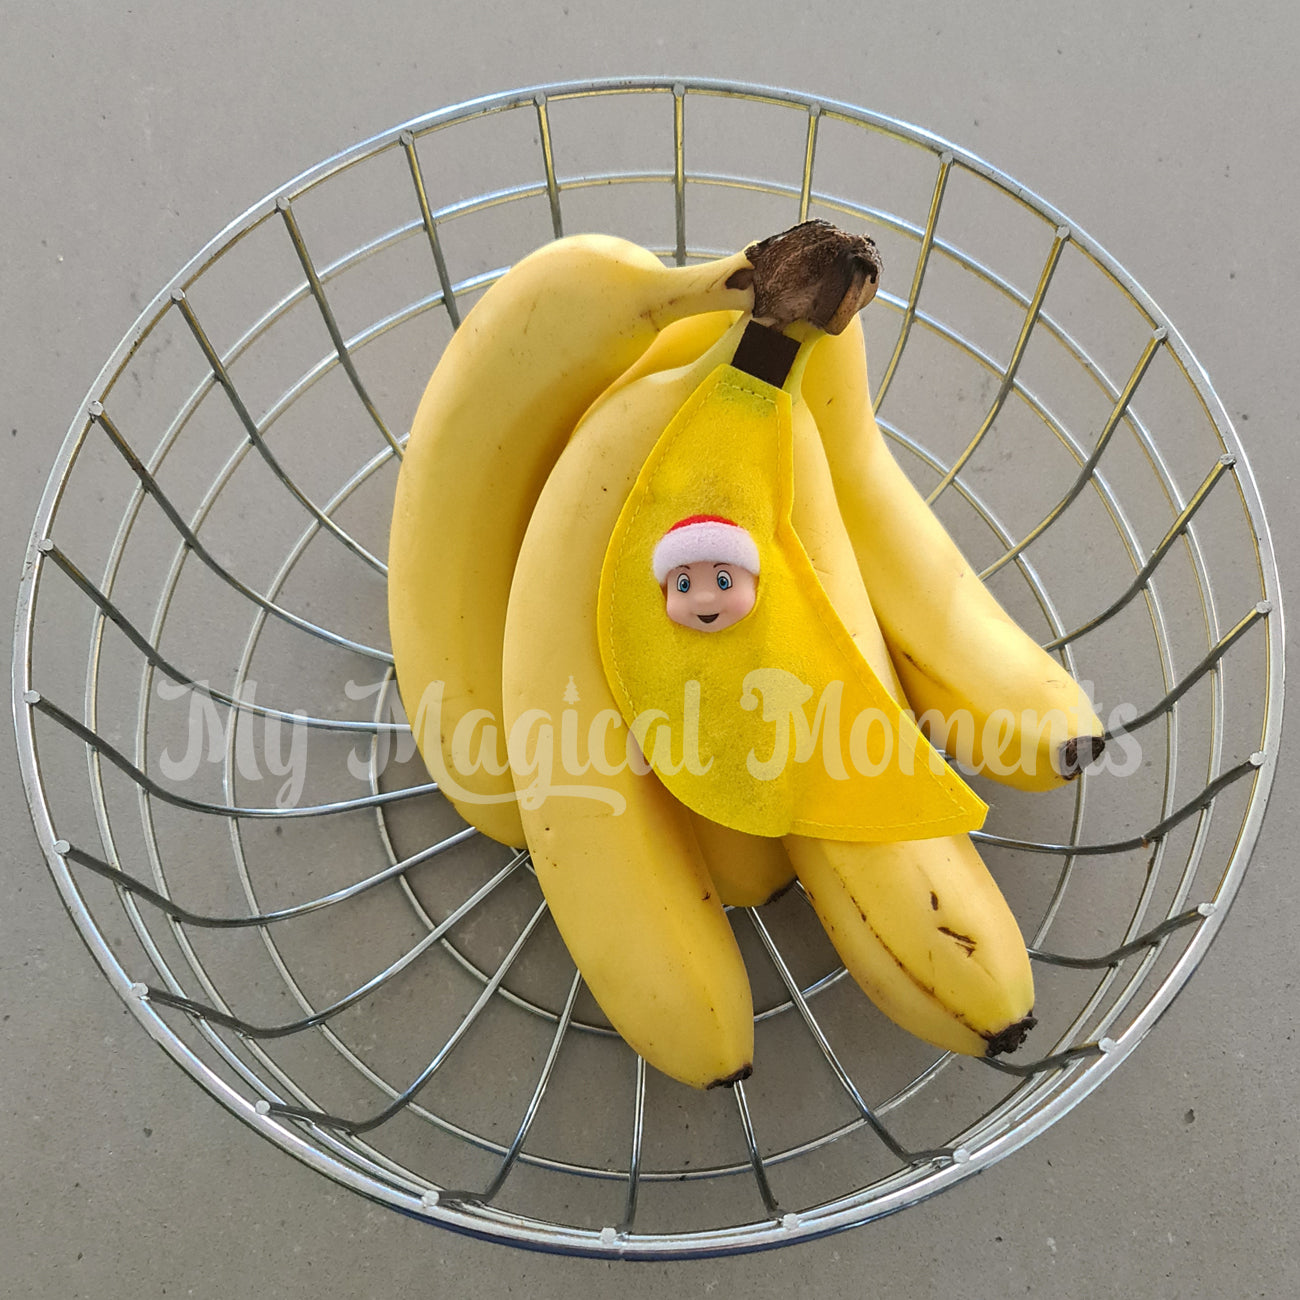 Elf baby dressed as a banana hiding in a fruit bowl